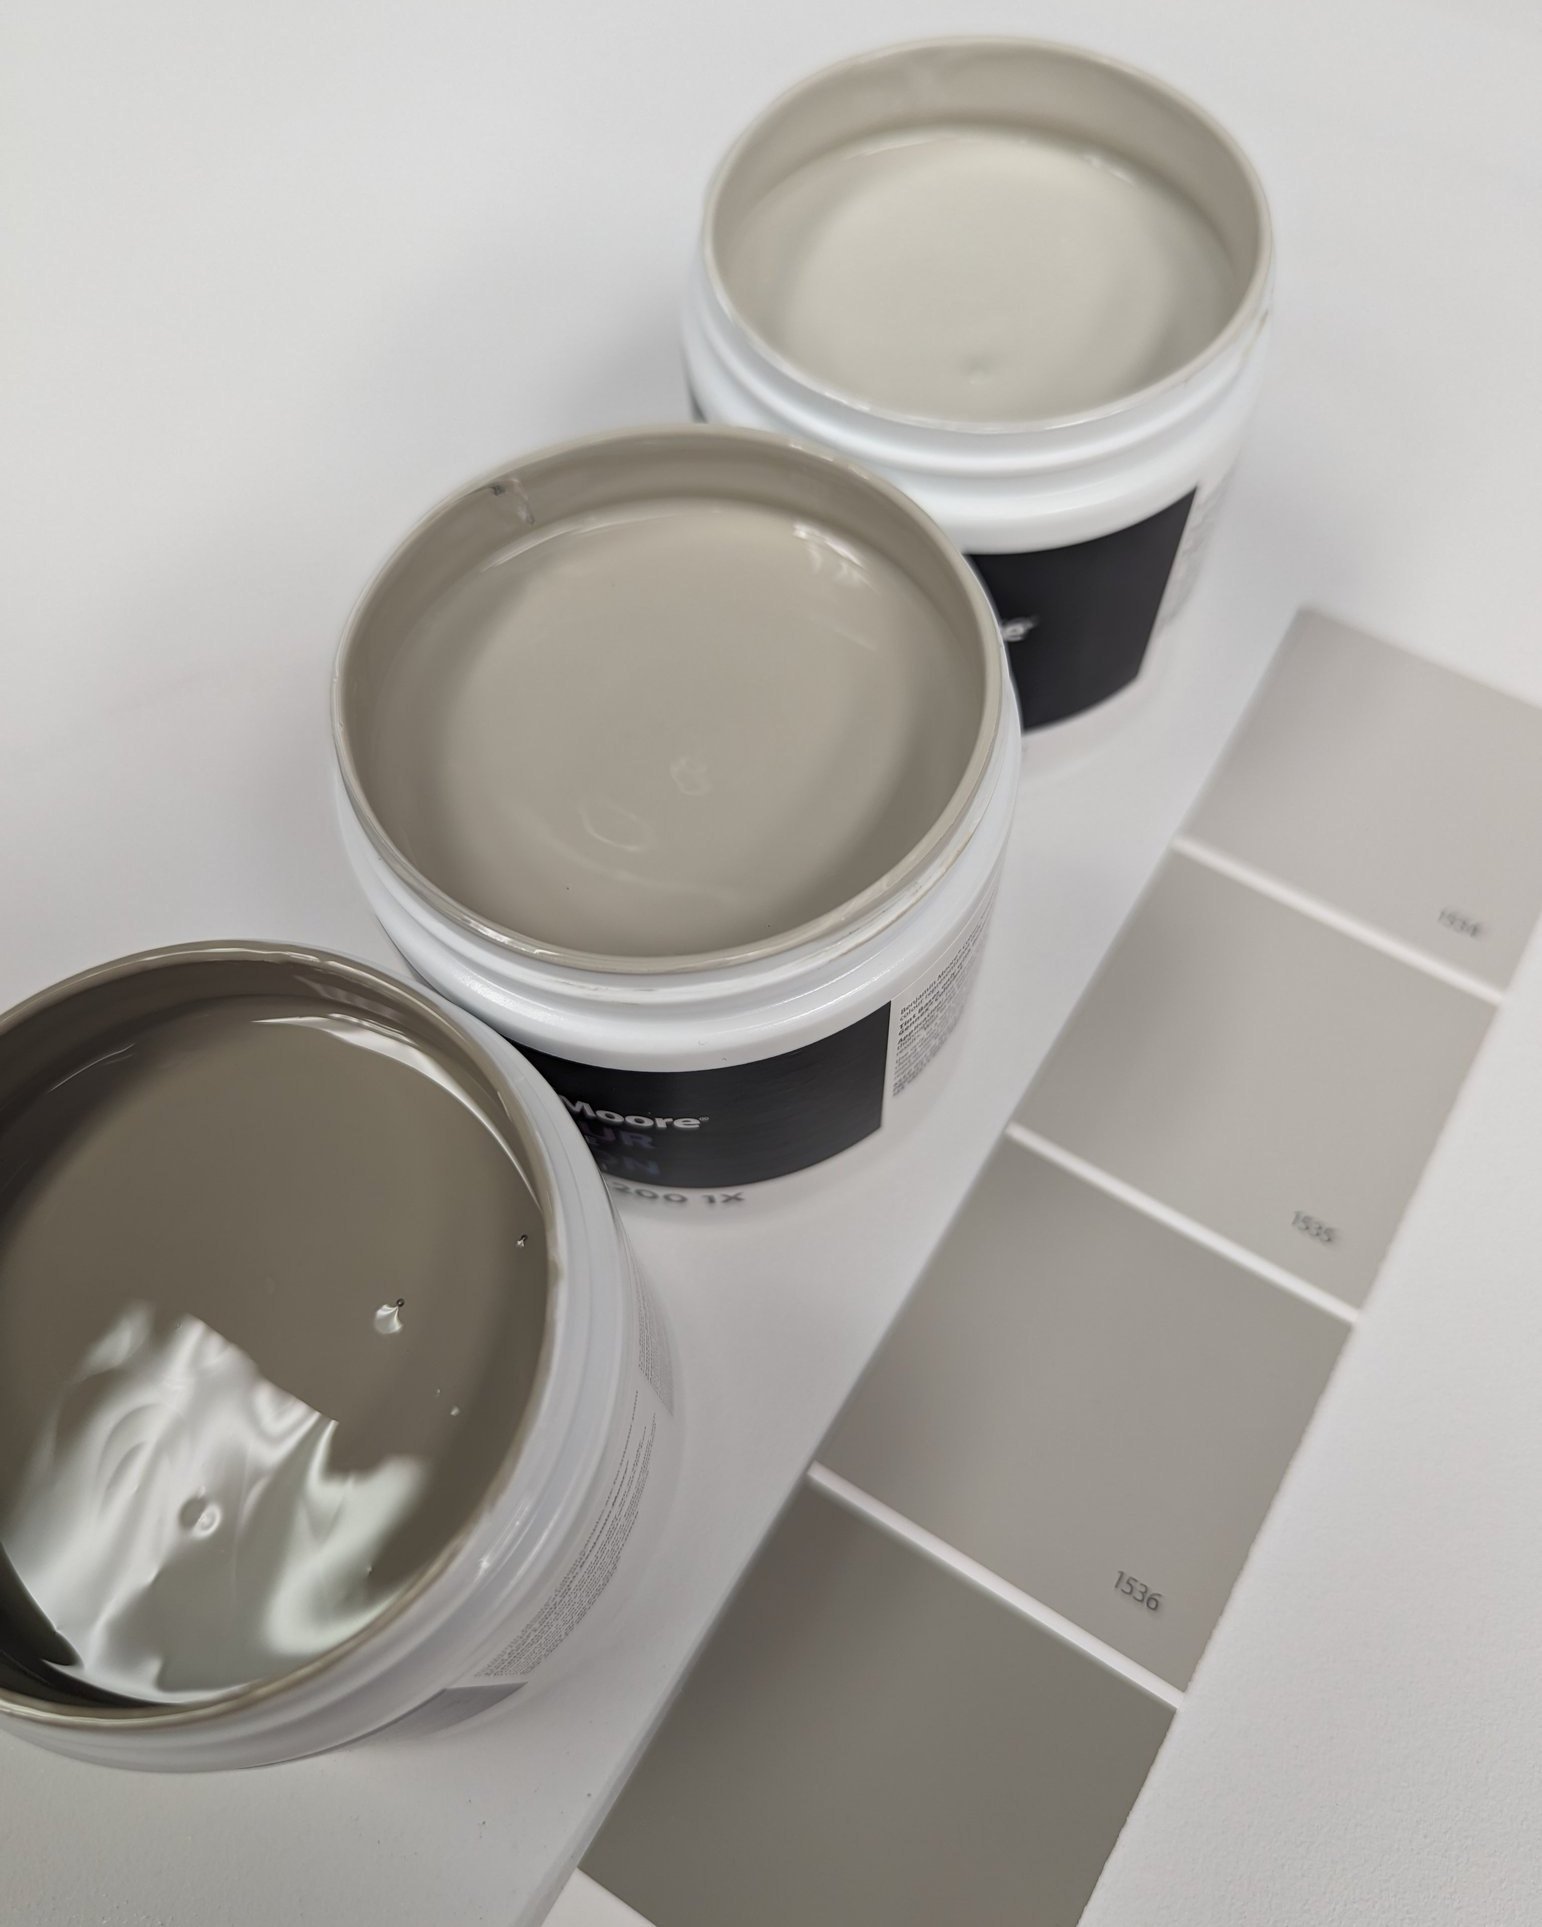 When choosing colours for an accent wall or accent features in your space, following the gradient of lighter and darker in the Benjamin Moore Classics and the Colour Preview Collections will help you stay within the same family of undertones. This al